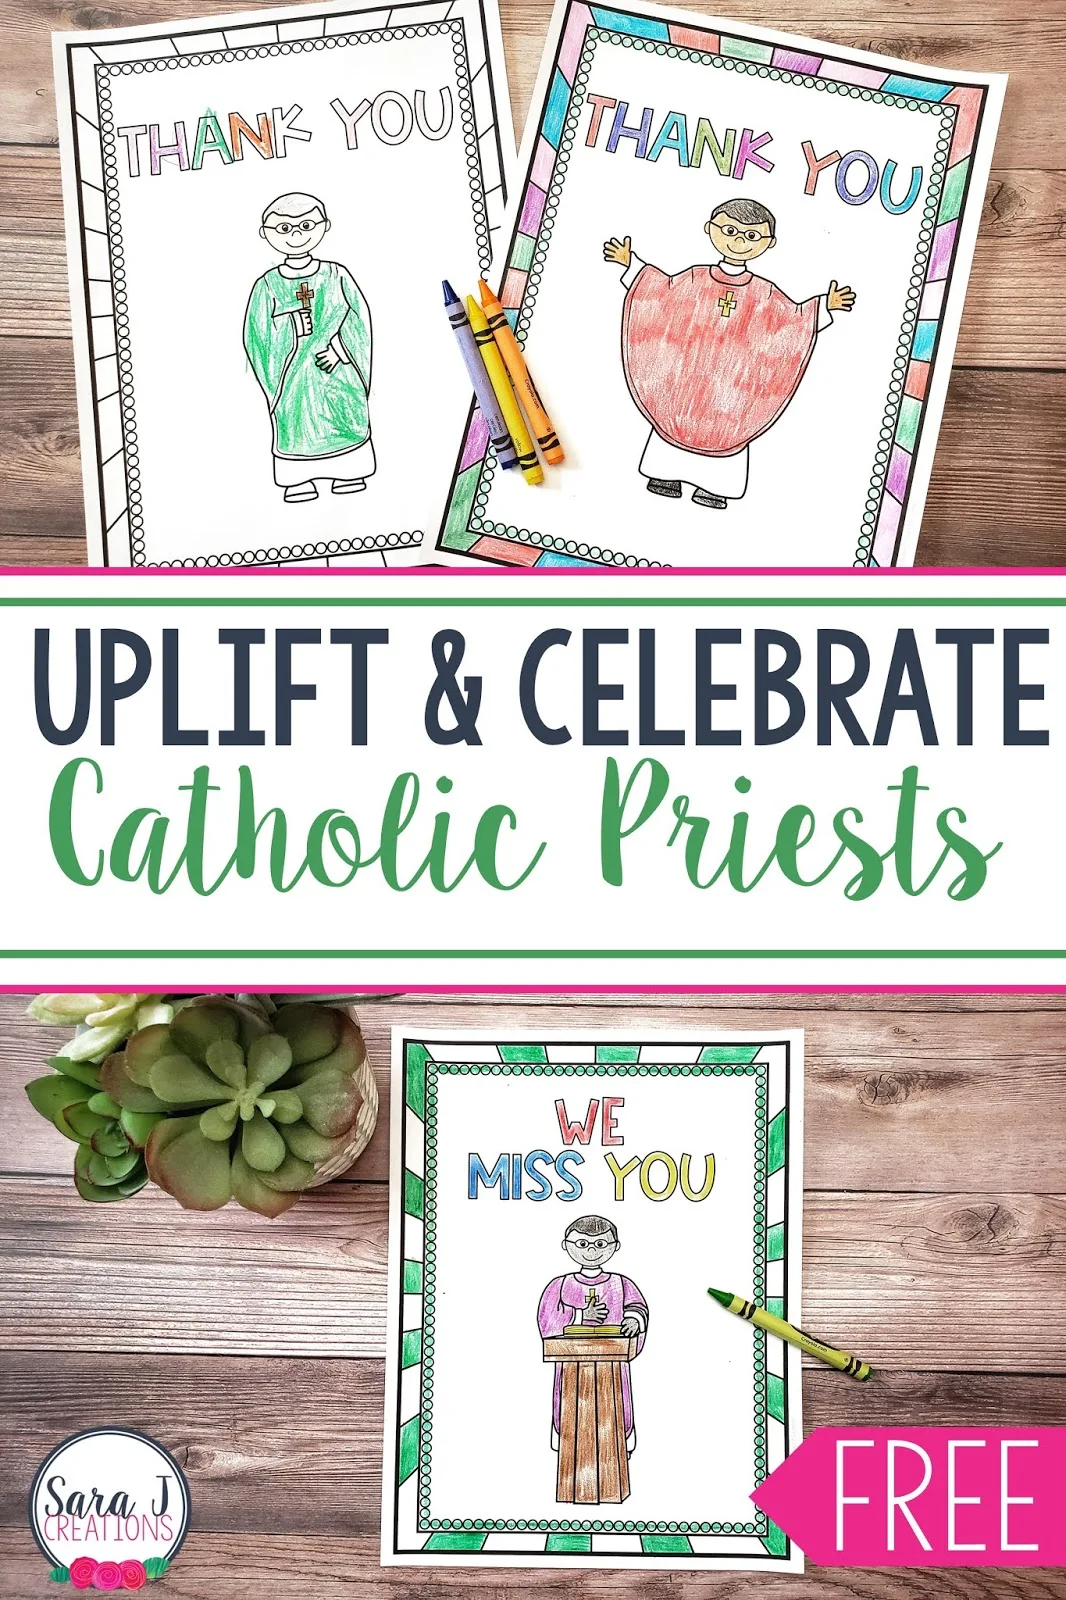 Uplift your Catholic priests with these free printable thank you cards. Perfect for having children show their priest how much they care!